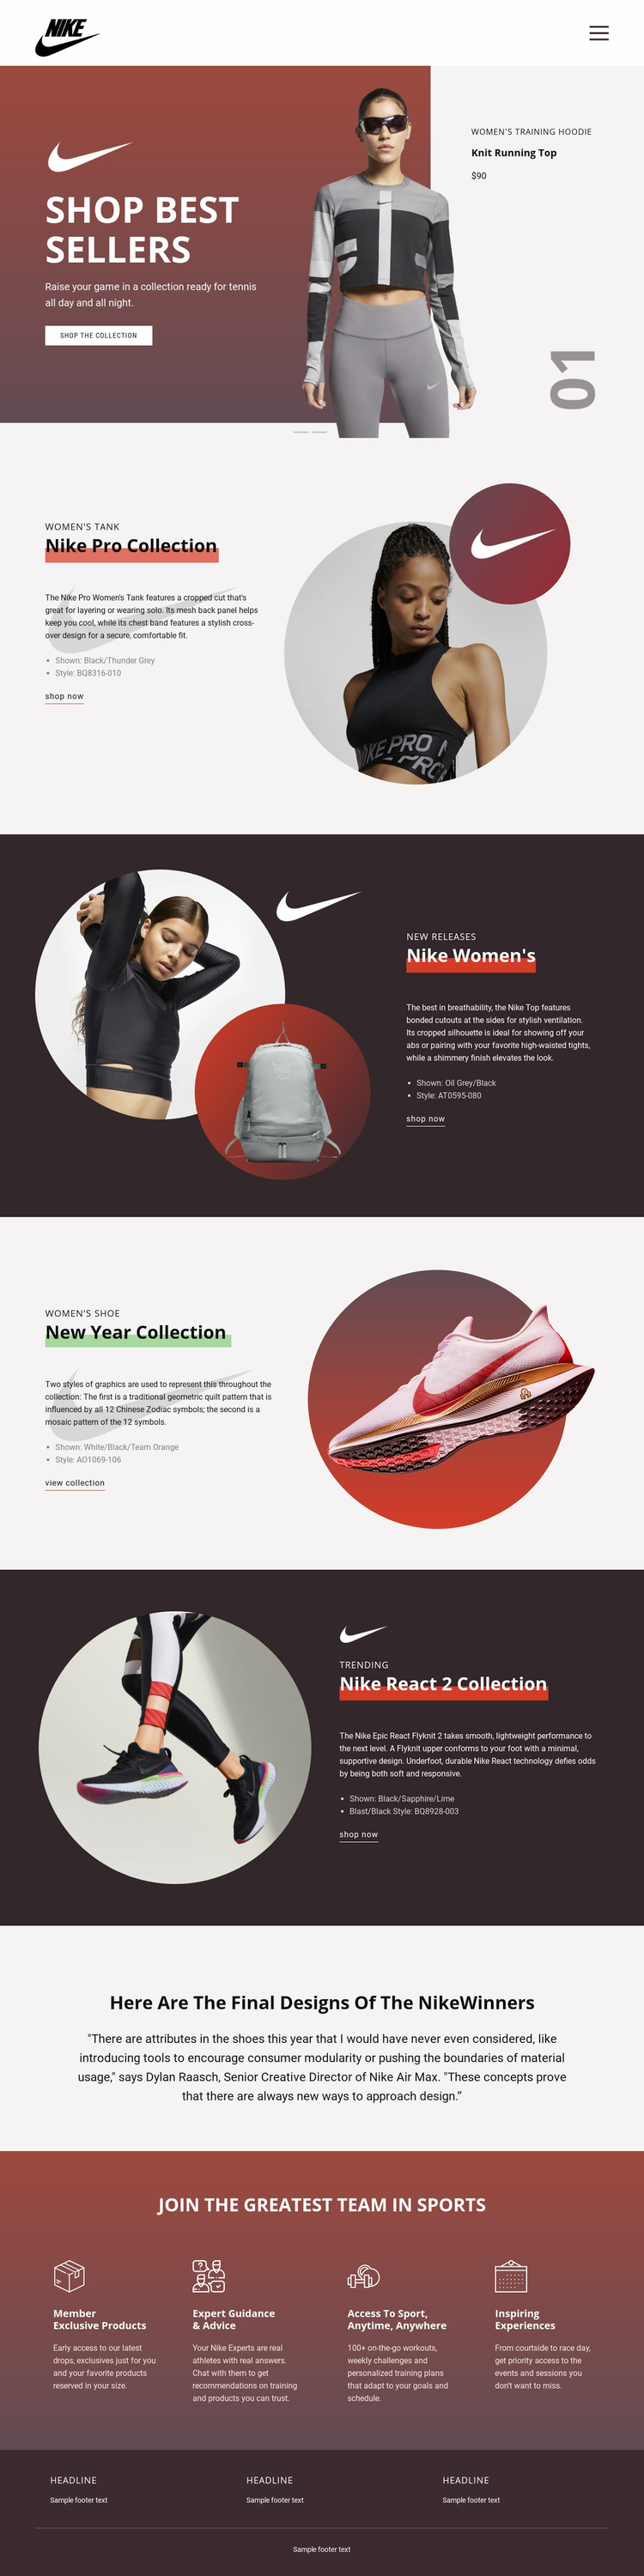 Best sellers for sports Wix Template Alternative